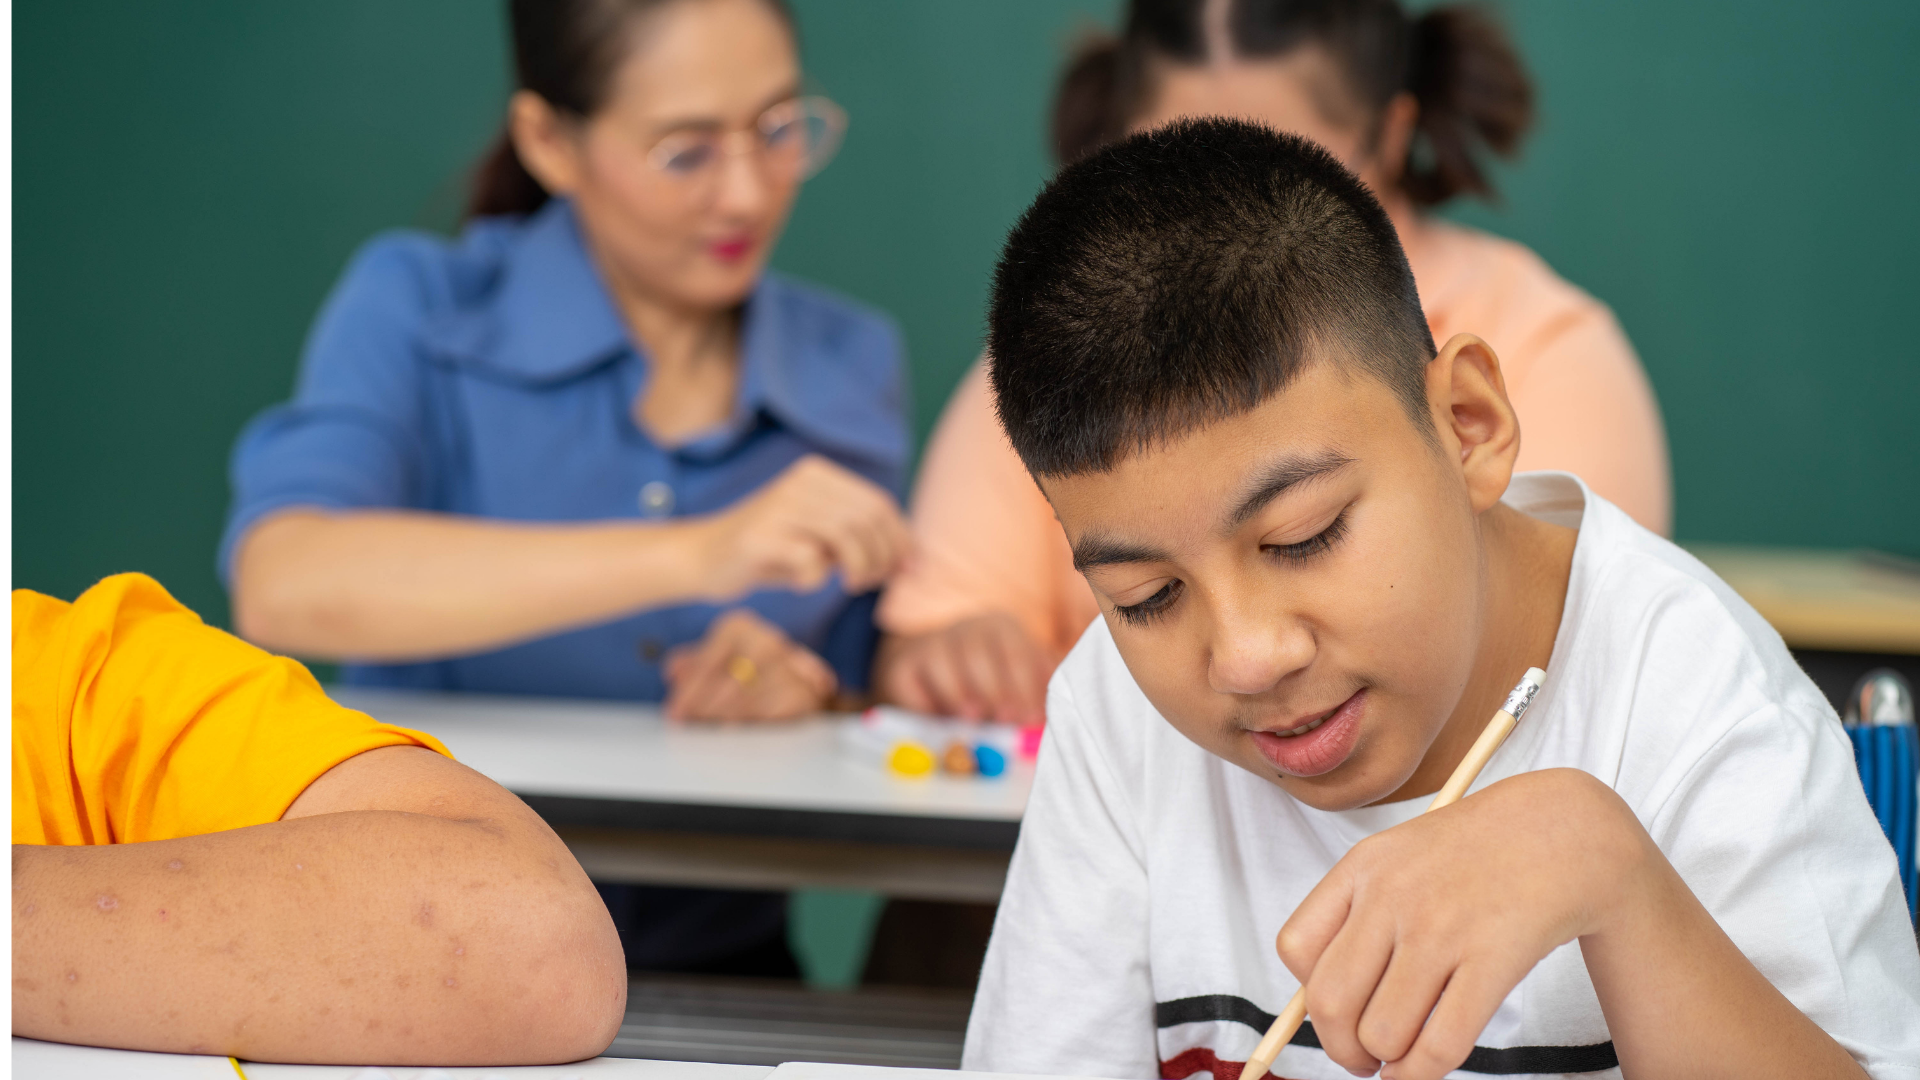 Photo of a hispanic adolescent male student writing at table with teacher and other students in background.